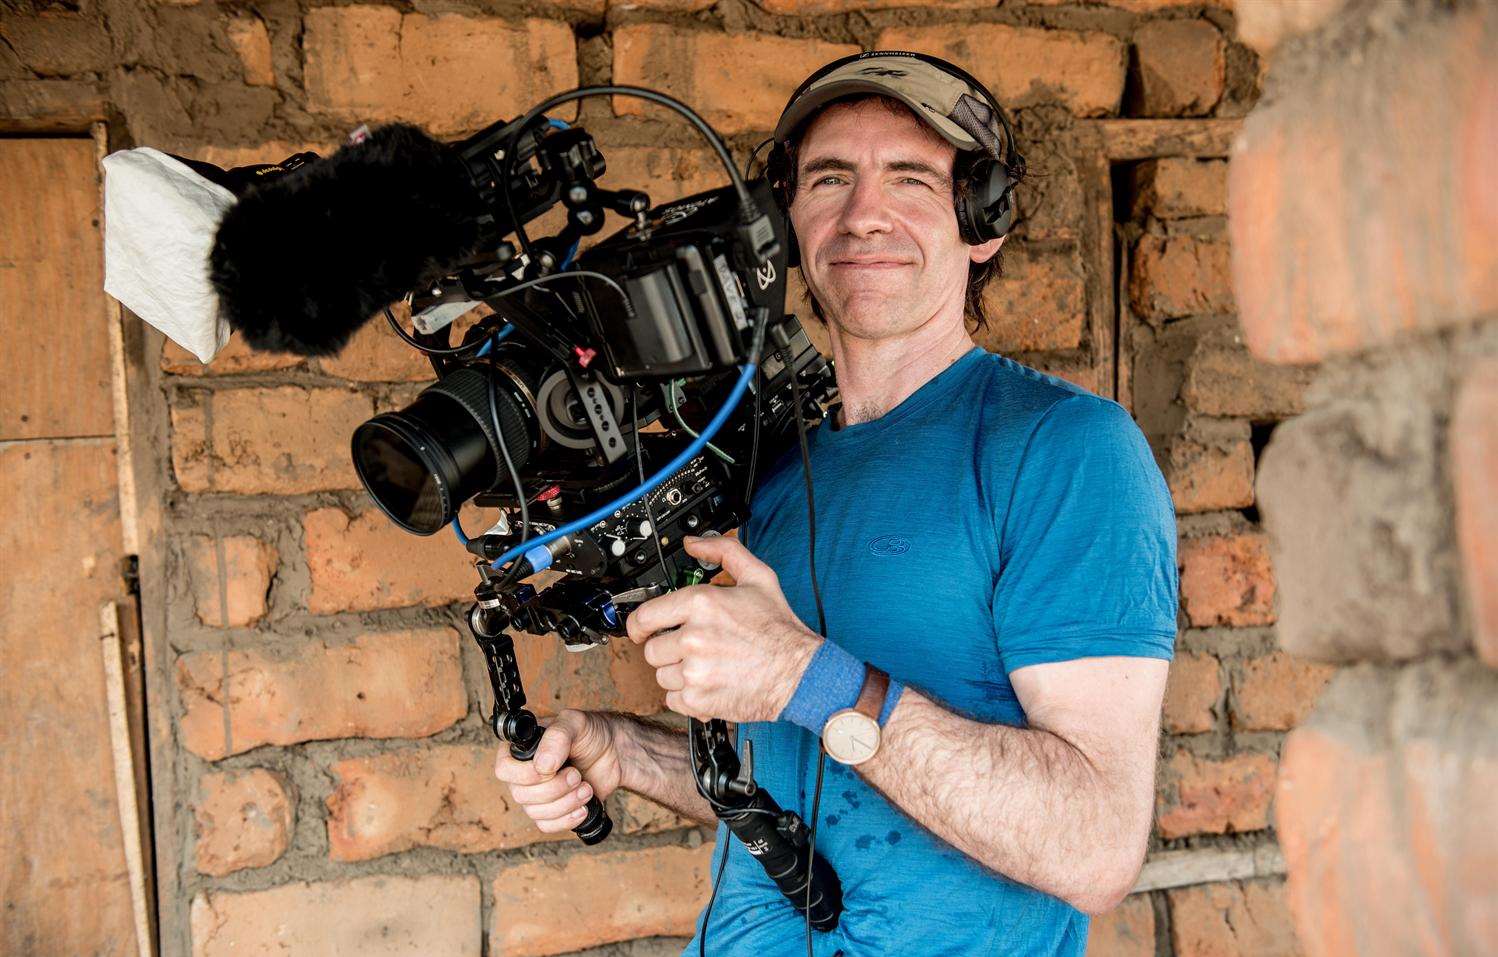 Dave Carter filming on the Sightsavers assignment in Malawi. Picture: Rachel Palmer Photography